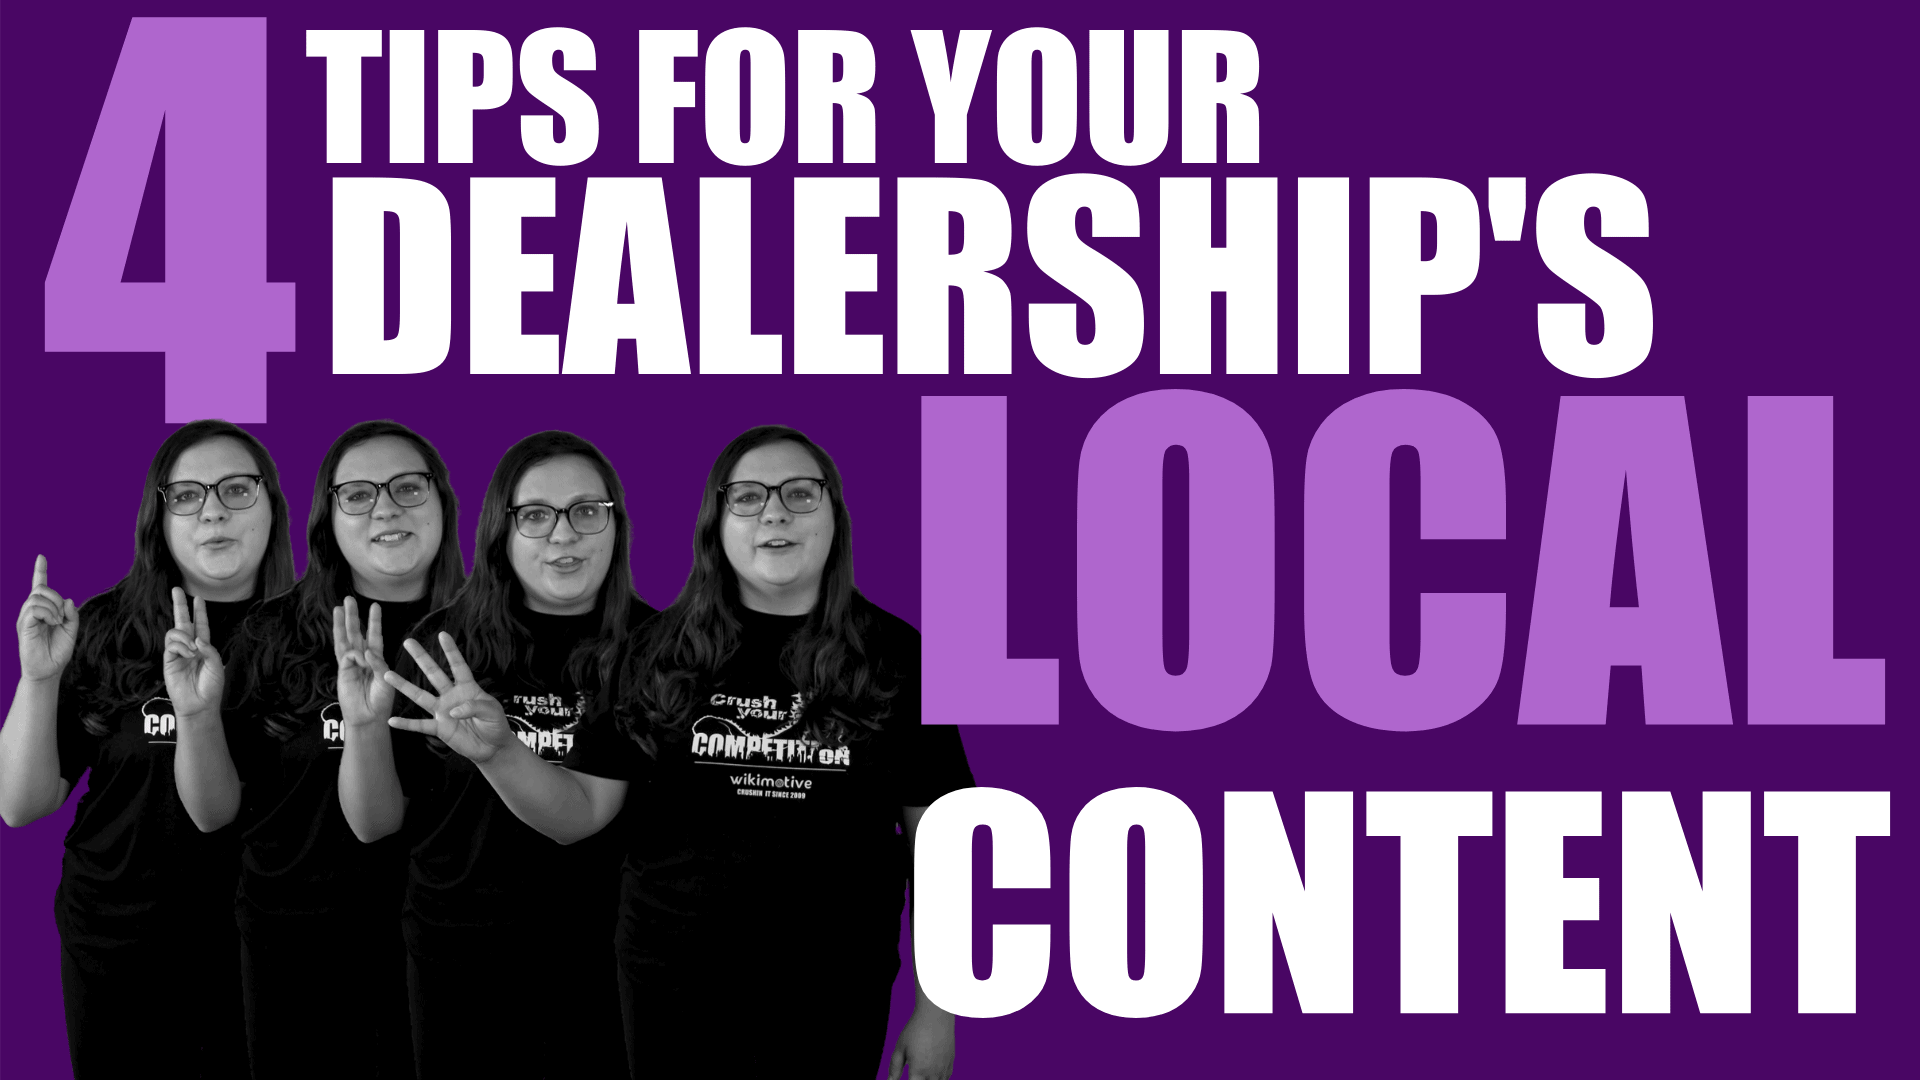 4 Tips For Your Dealership’s Local Content